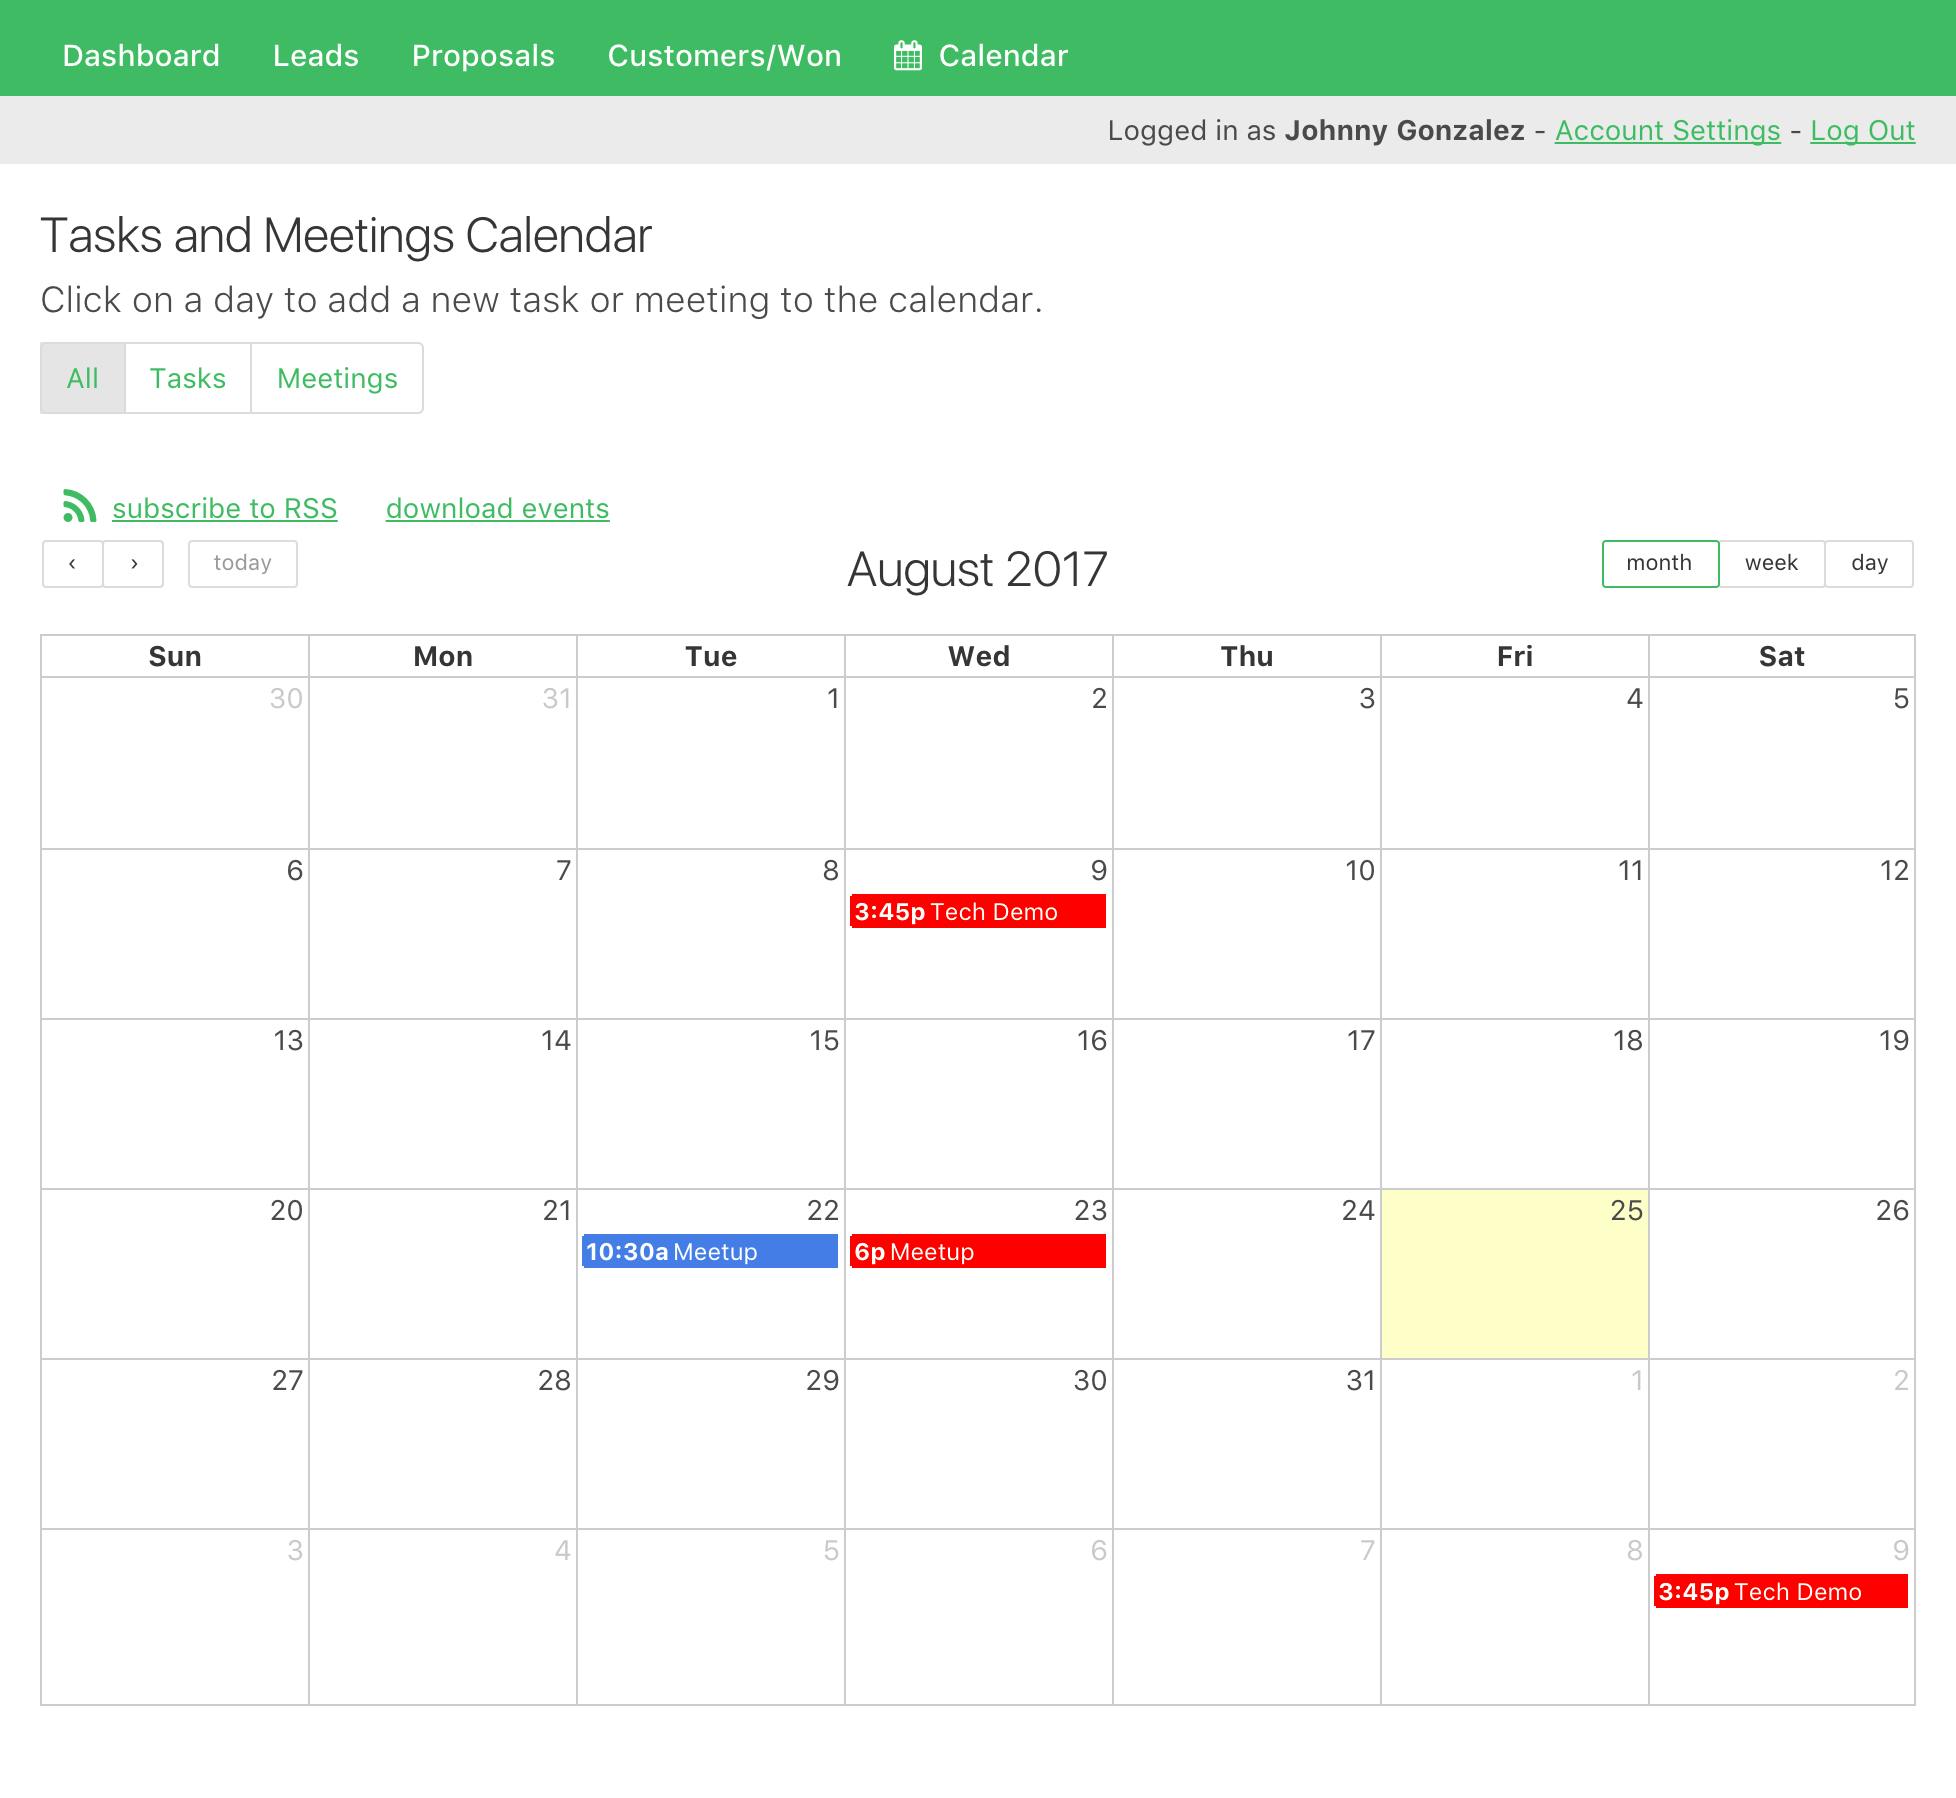 Each CRM lead has tasks and meetings that are assigned to each sales rep and tracked in a calendar.